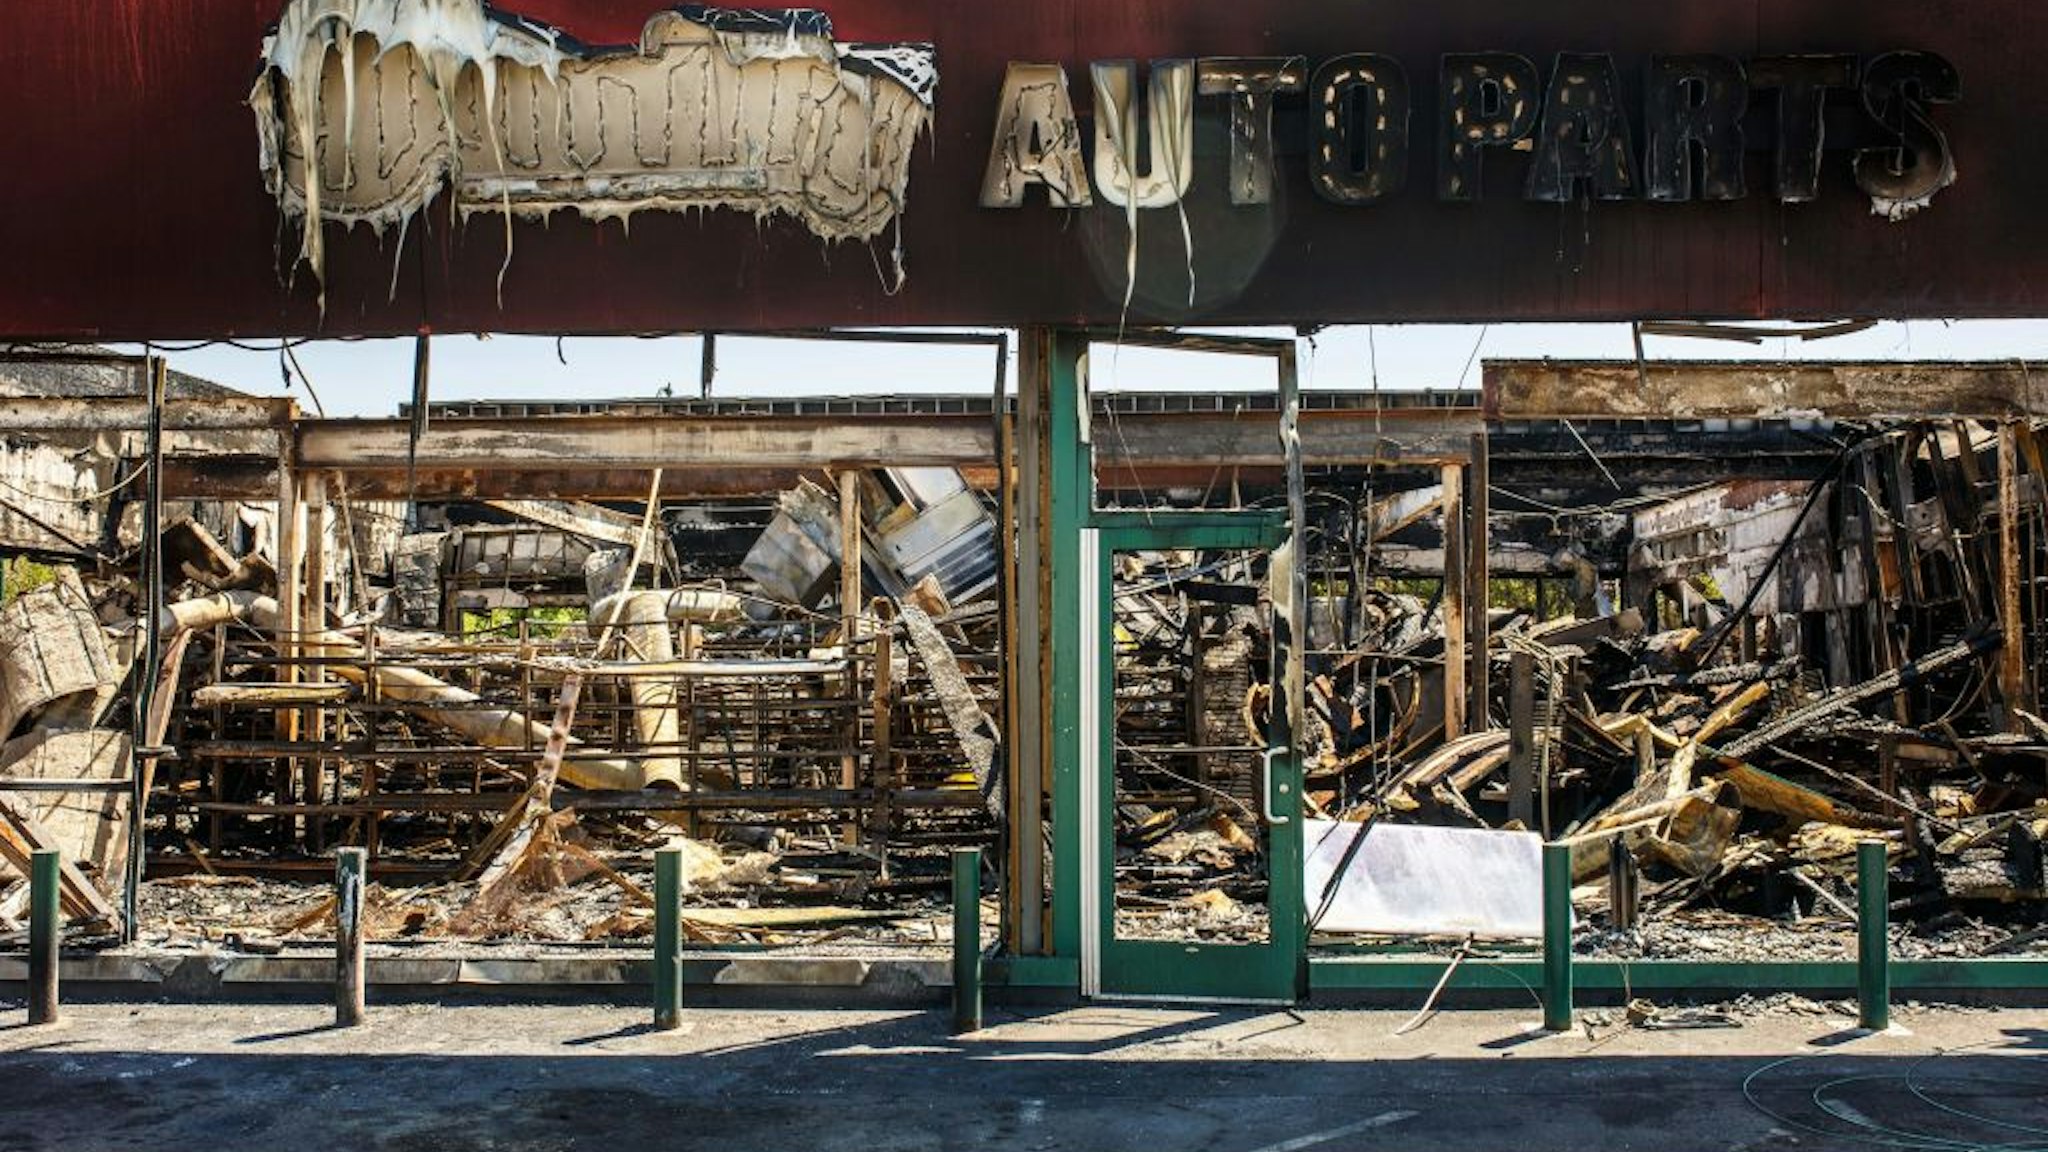 The charred wreckage of an Auto Parts store destroyed during last week's rioting which was sparked by the death of George Floyd on June 3, 2020 in Minneapolis, Minnesota. - Former Minneapolis police officer Derek Chauvin, who kneeled on the neck of George Floyd who later died, will now be charged with second-degree murder, and his three colleagues will face charges of aiding and abetting second-degree murder, court documents revealed on June 3. (Photo by Kerem Yucel / AFP) (Photo by KEREM YUCEL/AFP via Getty Images)